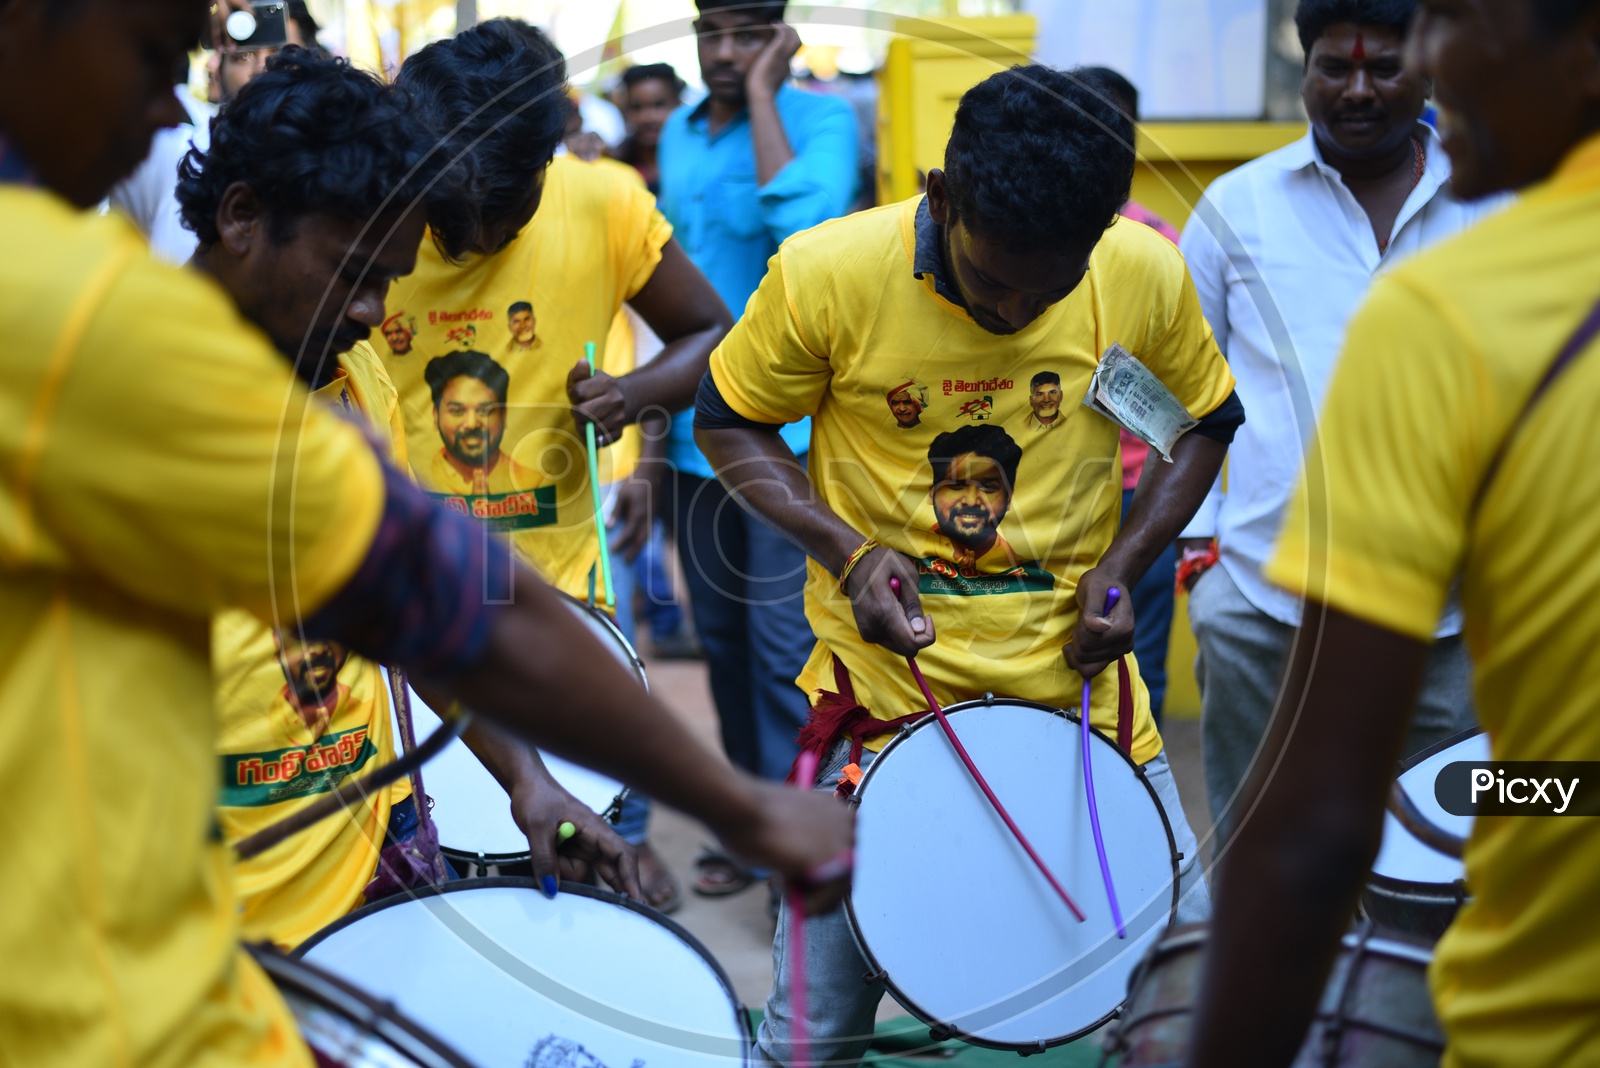 TDP party supporters wearing party t-shirts and playing drums at an election campaign rally